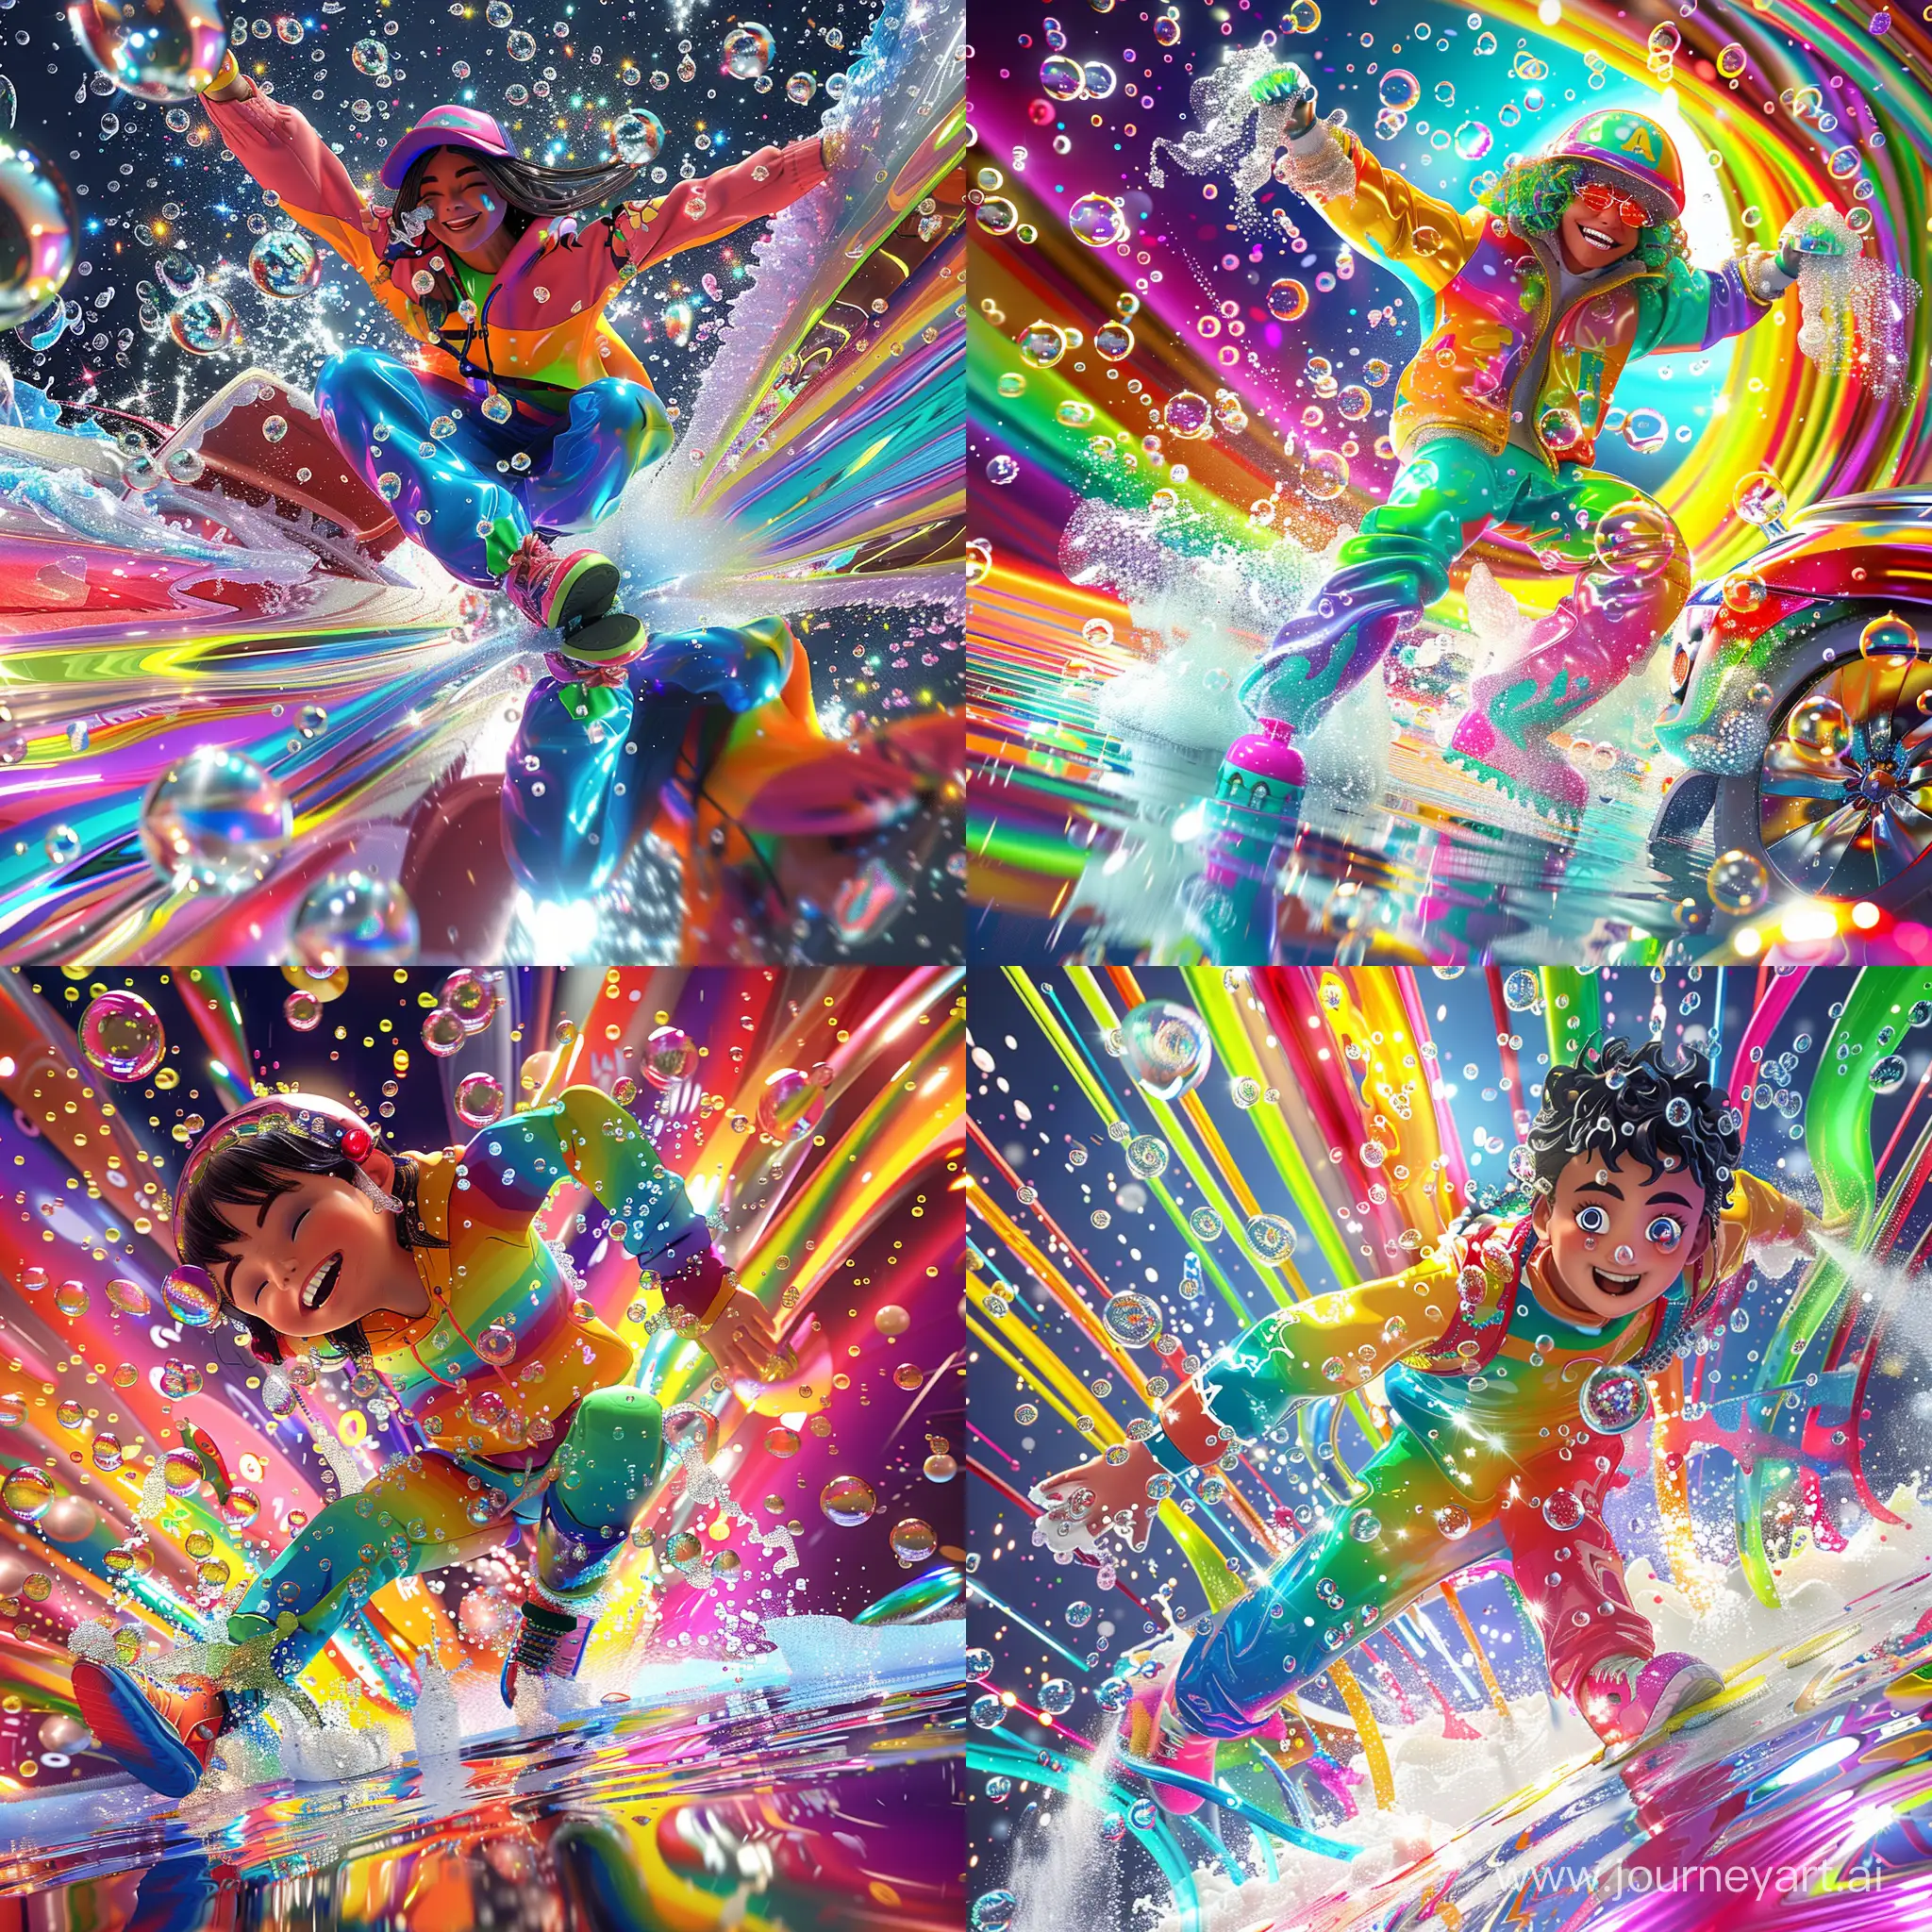 3d render of A vibrant poster featuring an animated person wearing bright, energetic colors, with a big smile on their face as they energetically clean a shiny car. The person's movements are dynamic, with bubbles and streaks of water flying around, giving the impression of speed and enthusiasm. The background is filled with colorful bubbles, soap suds, and sparkles, adding to the lively atmosphere of the scene. Overall, the poster radiates energy and enthusiasm for car cleaning!